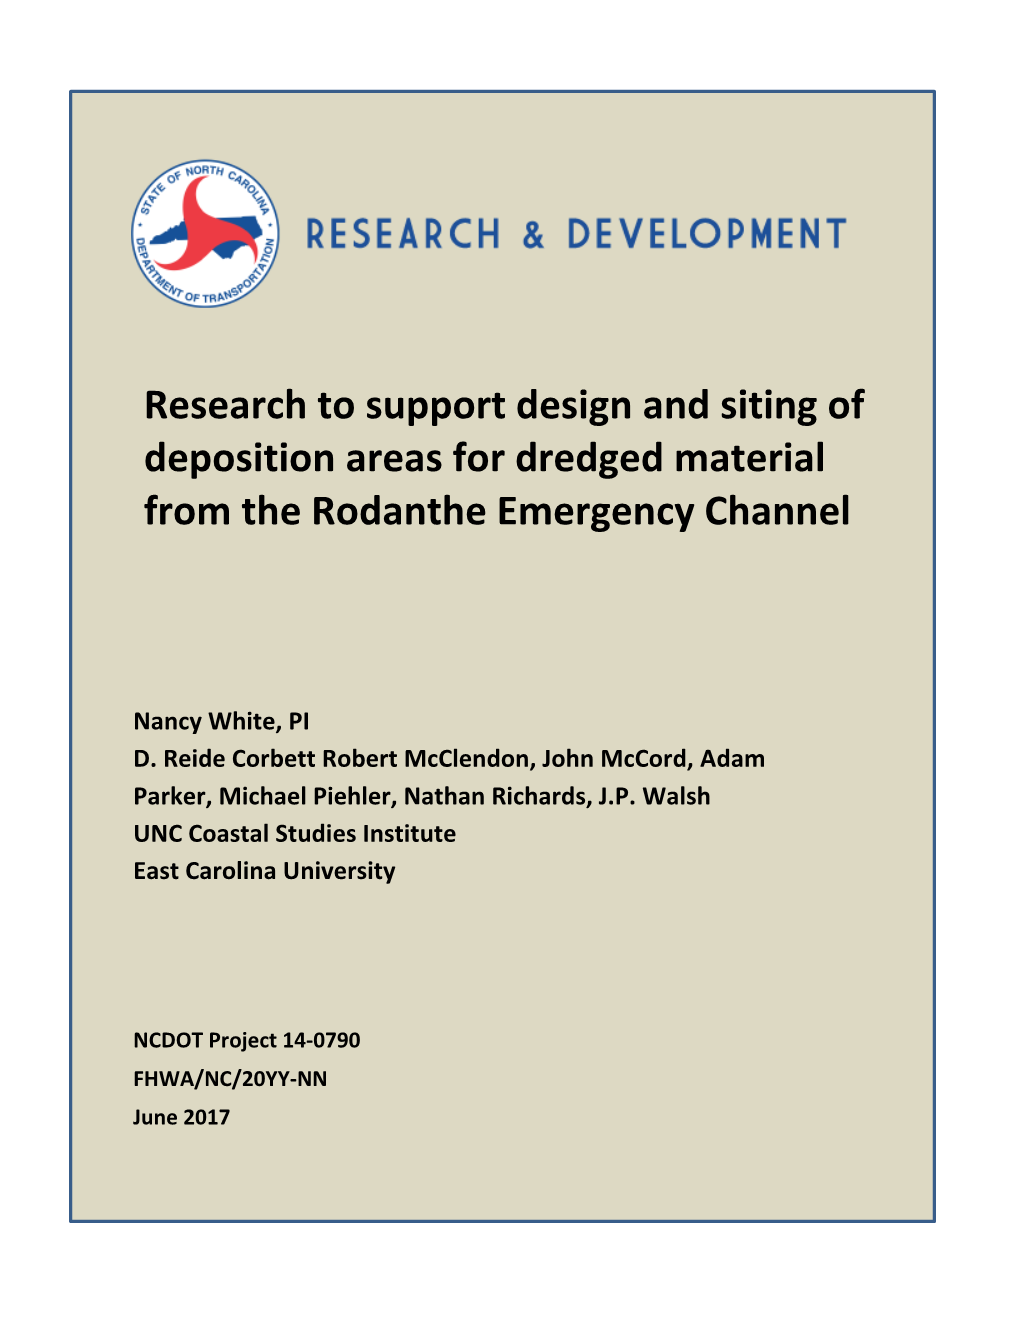 Research to Support Design and Siting of Deposition Areas for Dredged Material from the Rodanthe Emergency Channel” (Project ID: 2015-20)